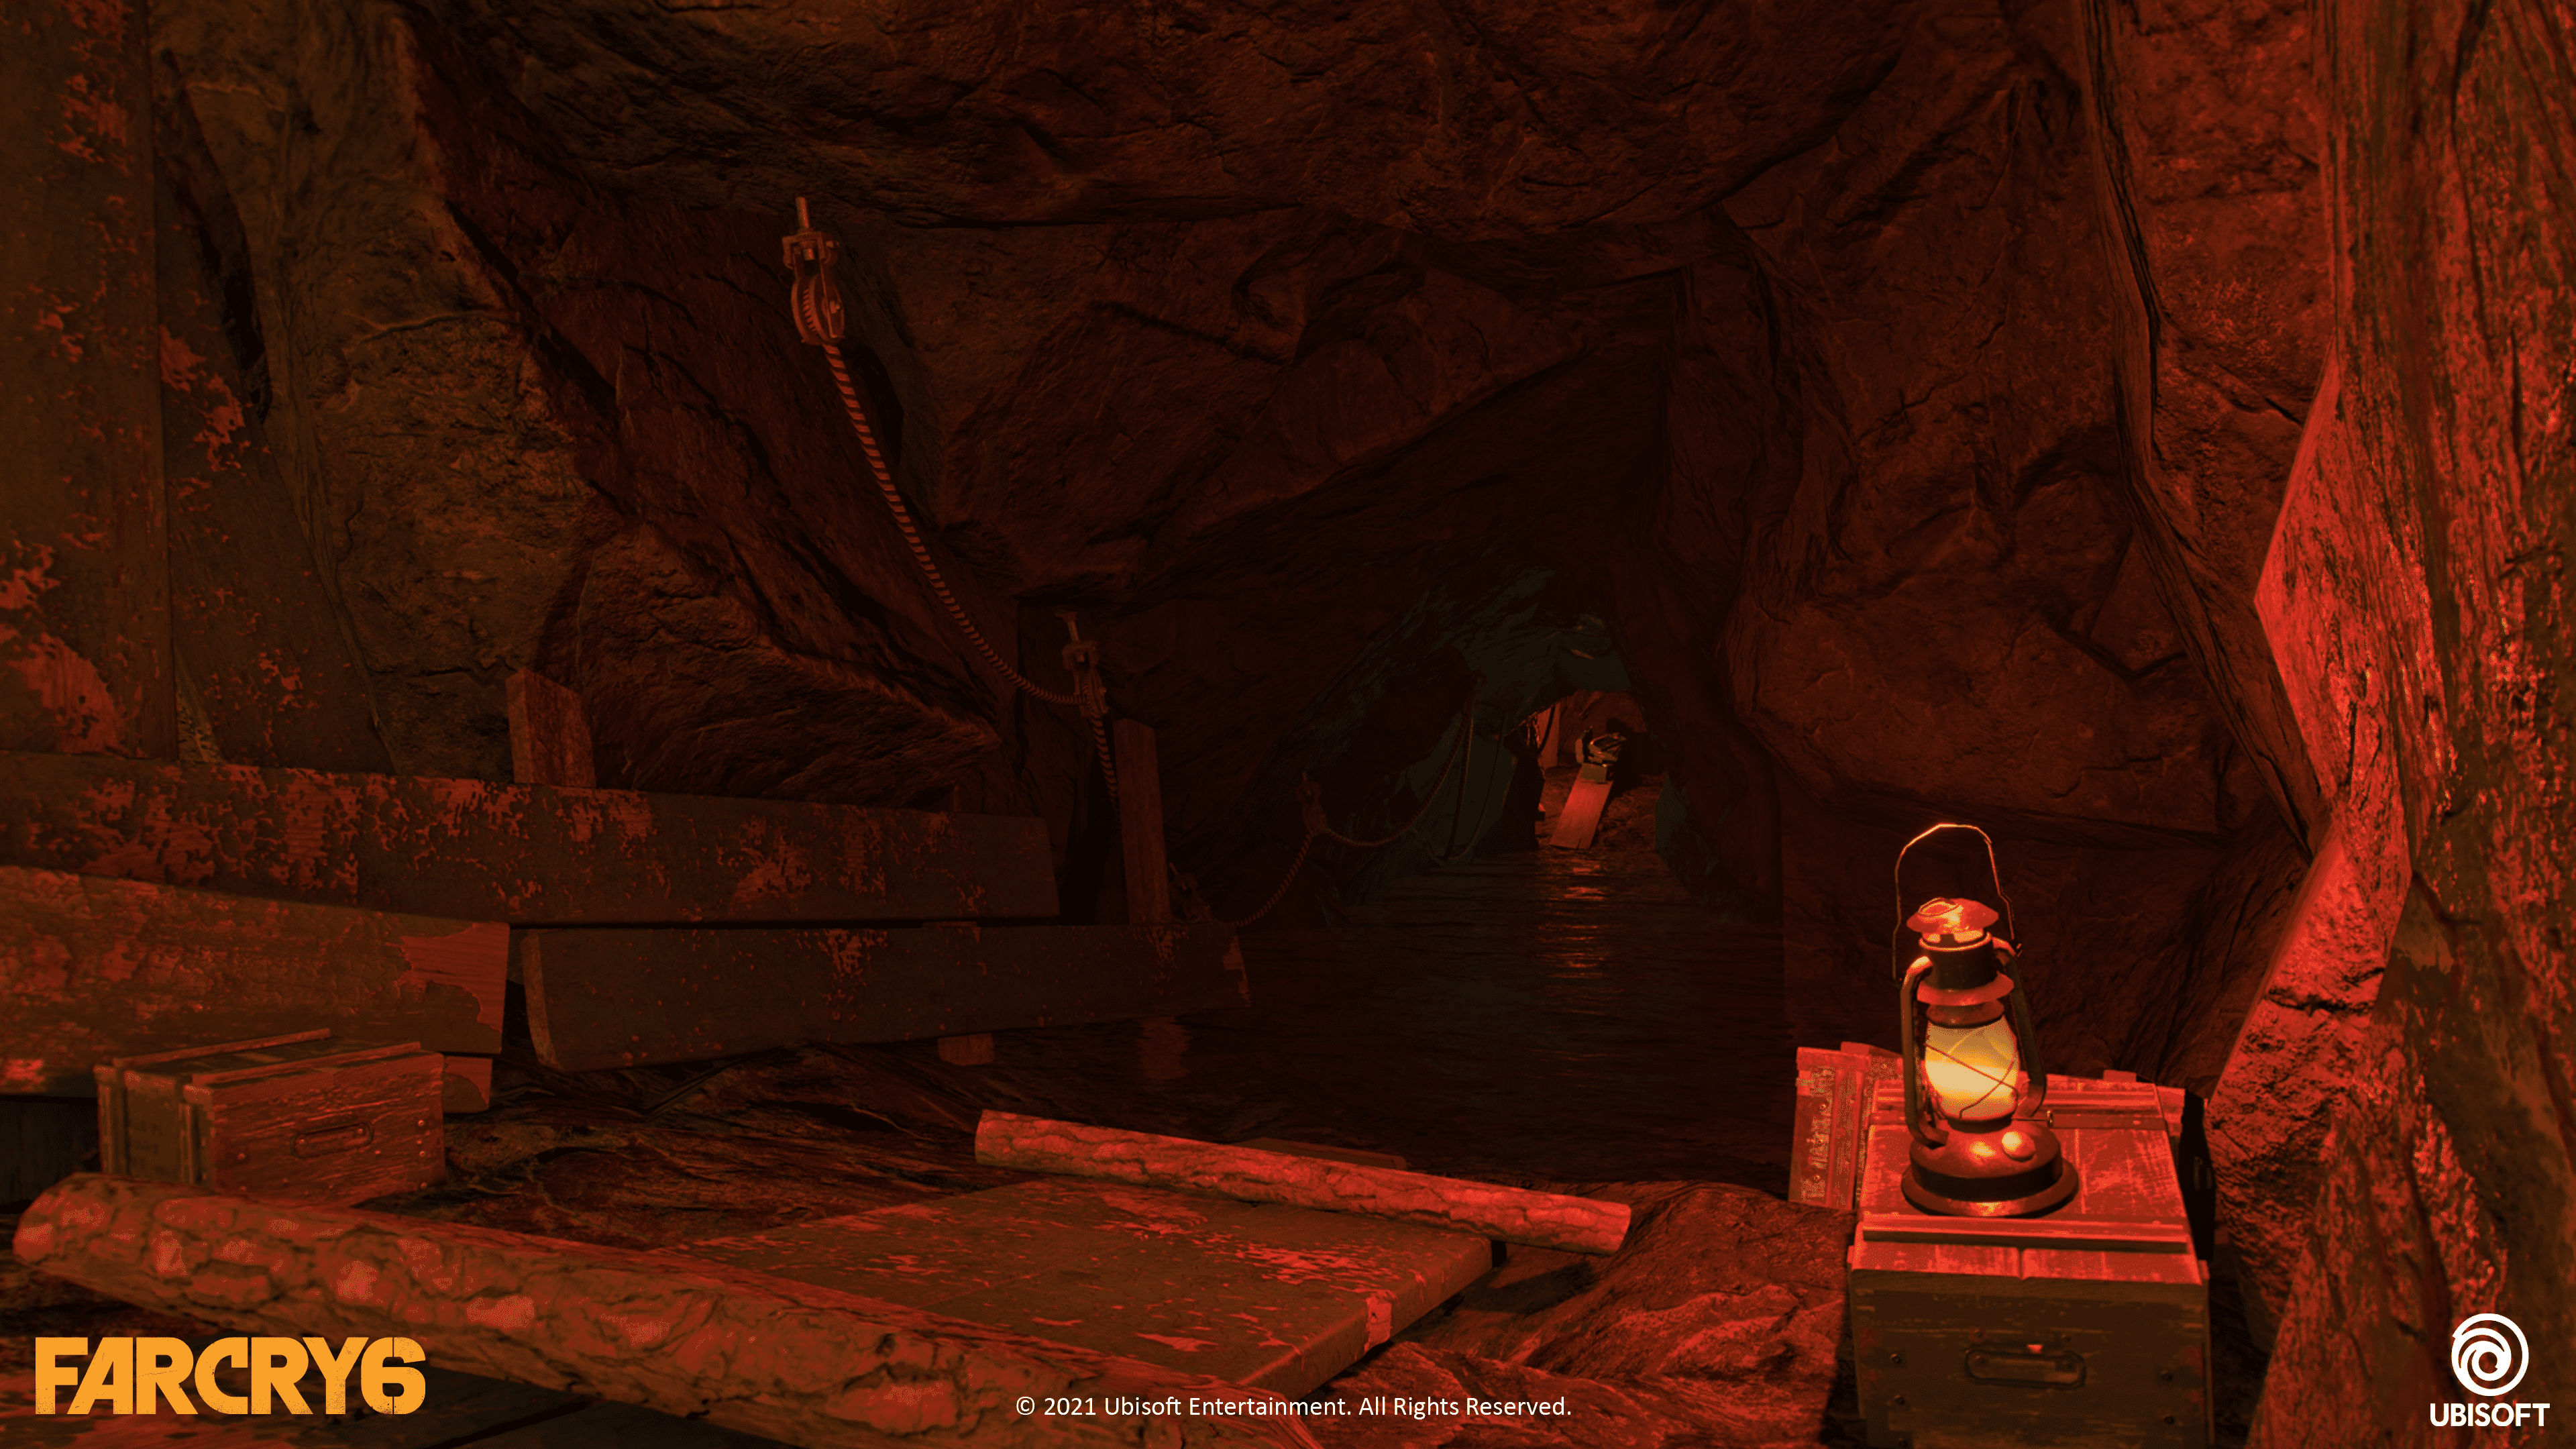 Cave lit in red light from lamp with underground stream